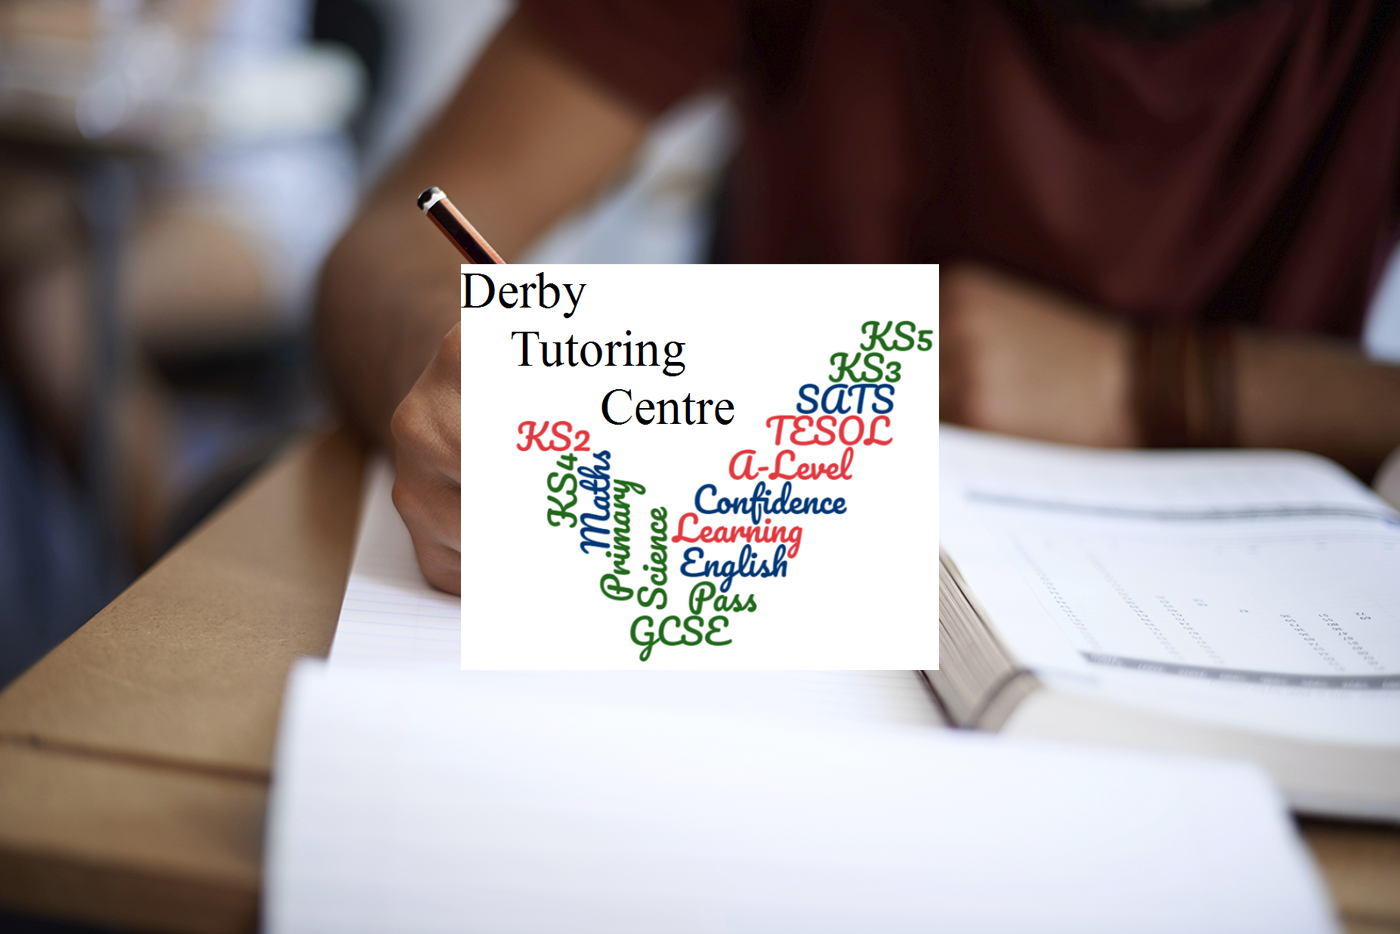 Derby Tutoring Centre - Start your tuition journey today